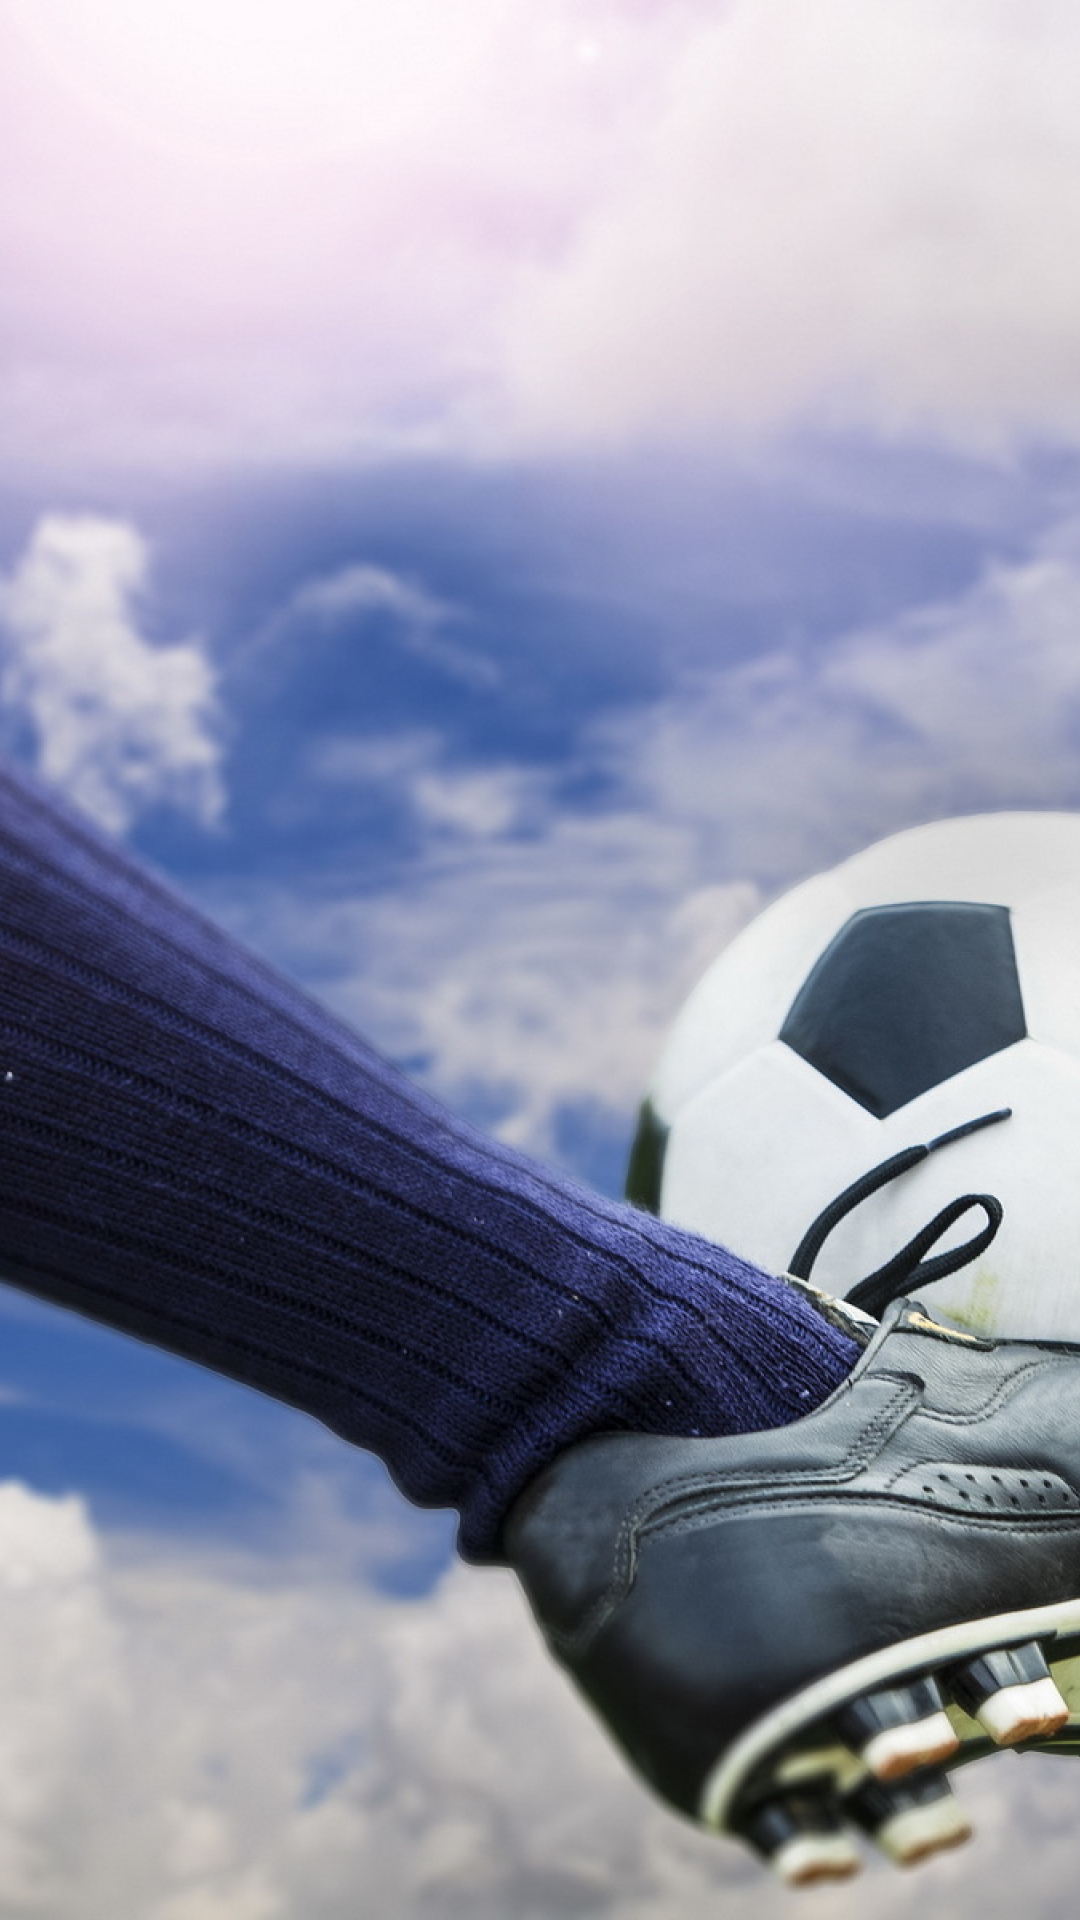 Football Boot And Ball Background - HD Wallpaper 